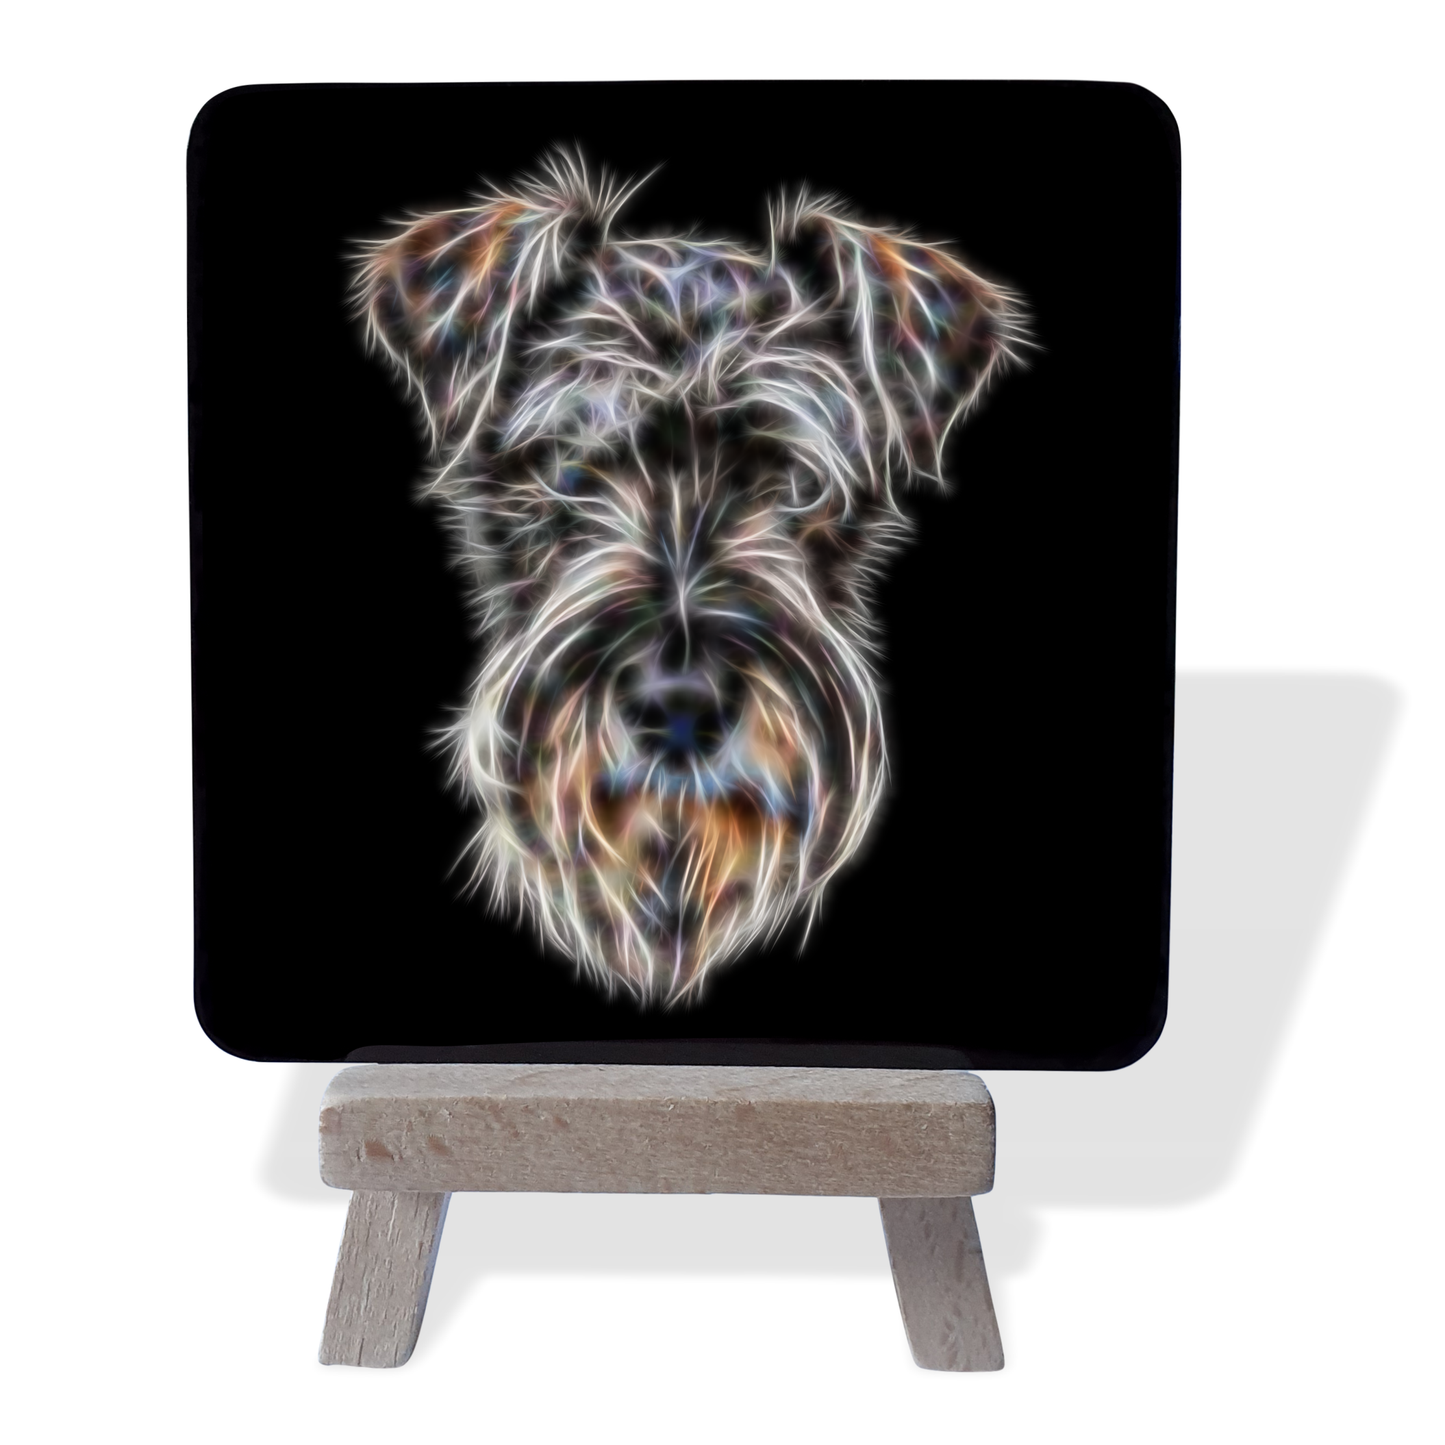 Schnauzer #4 Metal Plaque and Mini Easel with Fractal Art Design